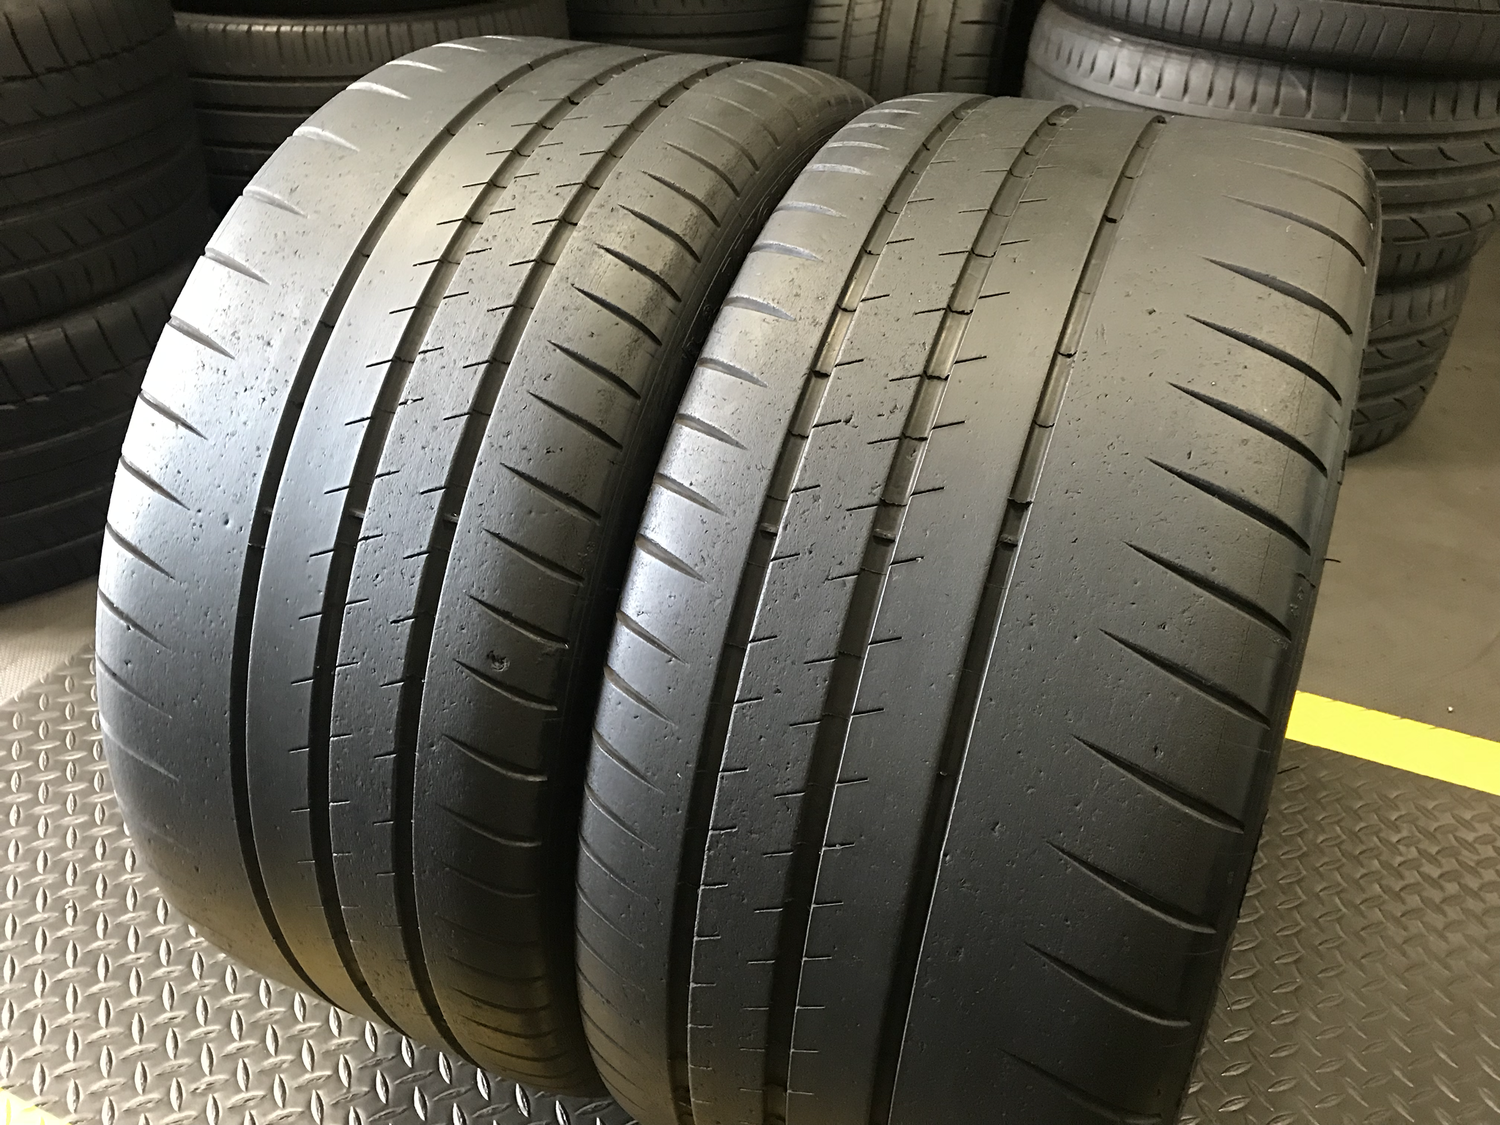 2 USED TIRES 265/35ZR19 Michelin PILOT SPORT CUP 2 WITH 85%